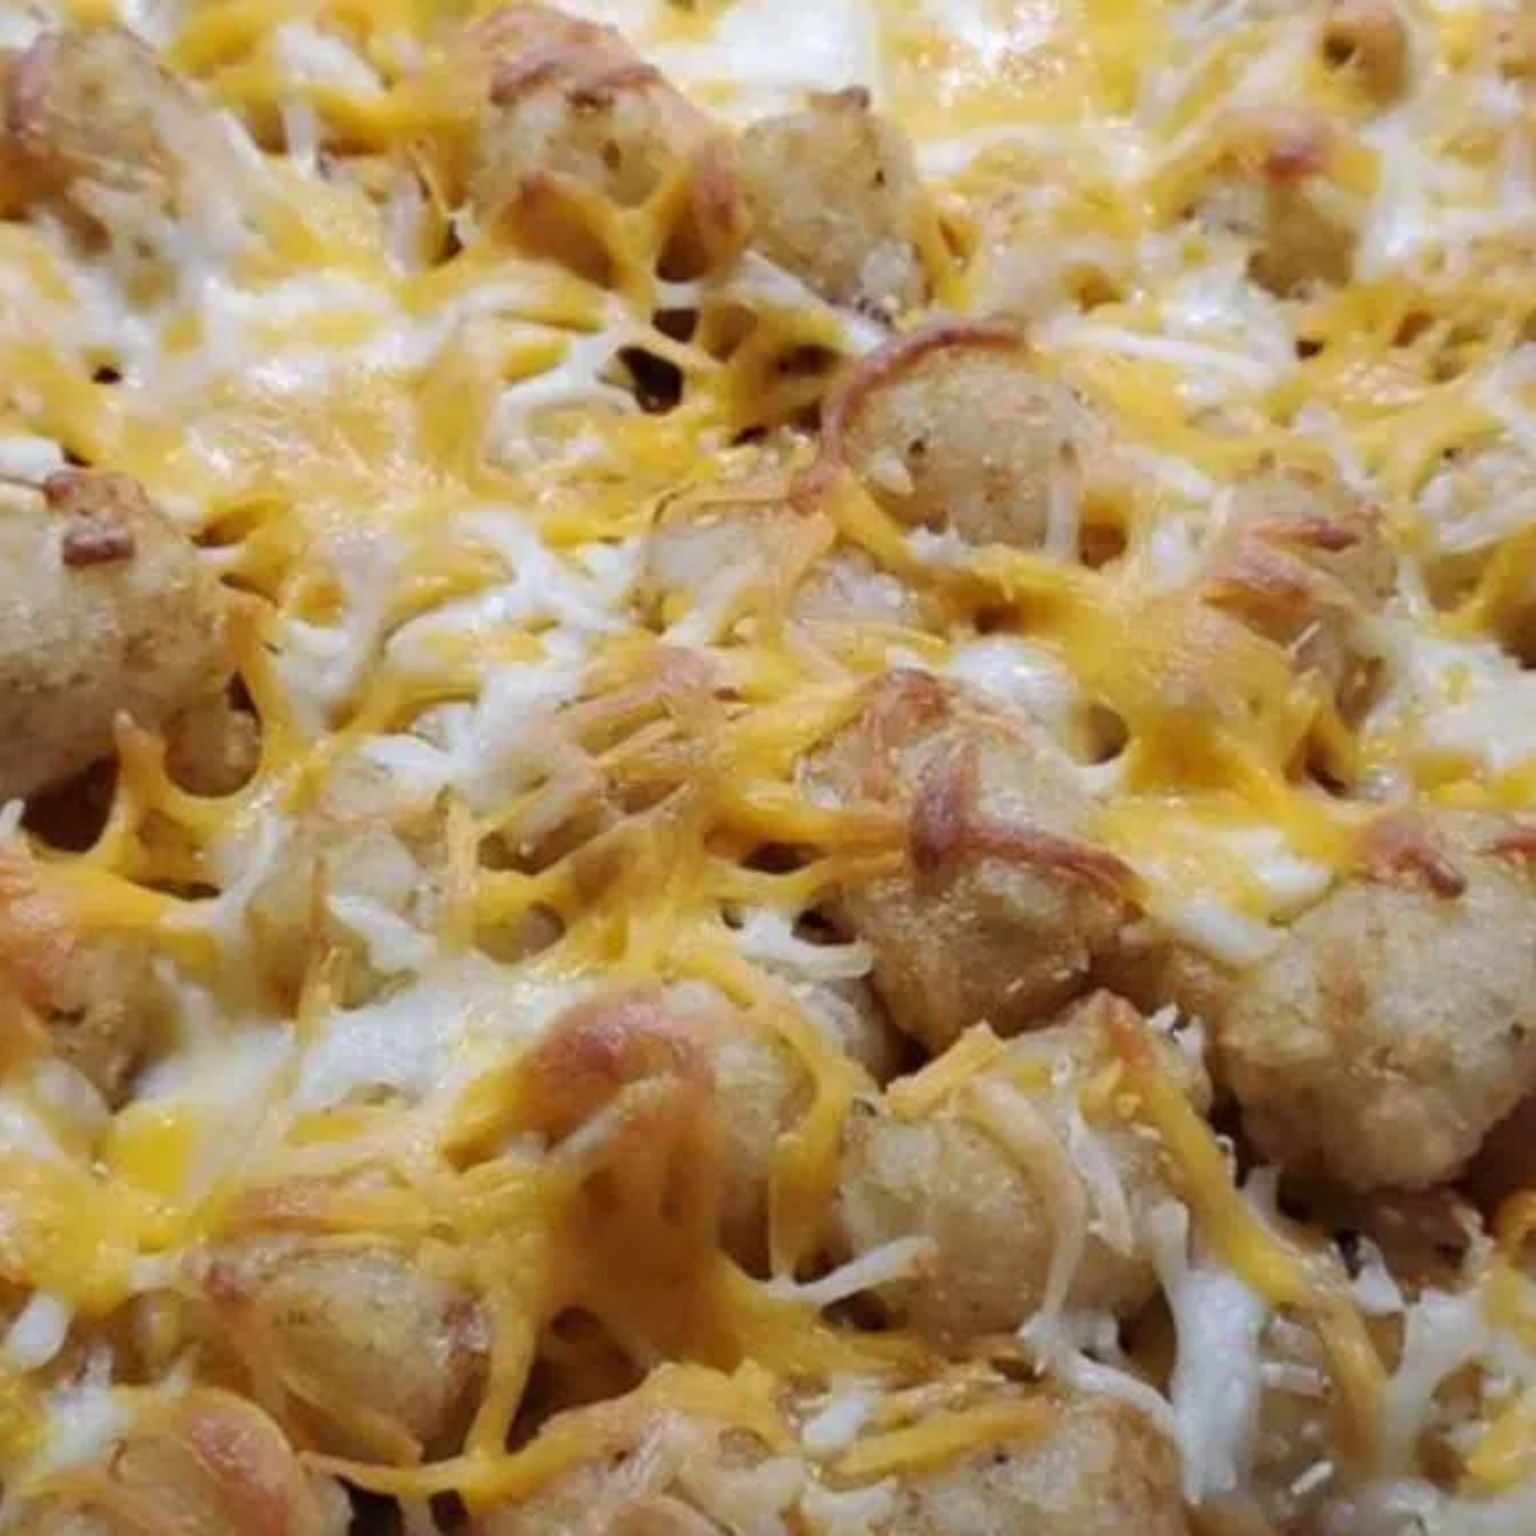 Recipe for Tater Tot Casserole